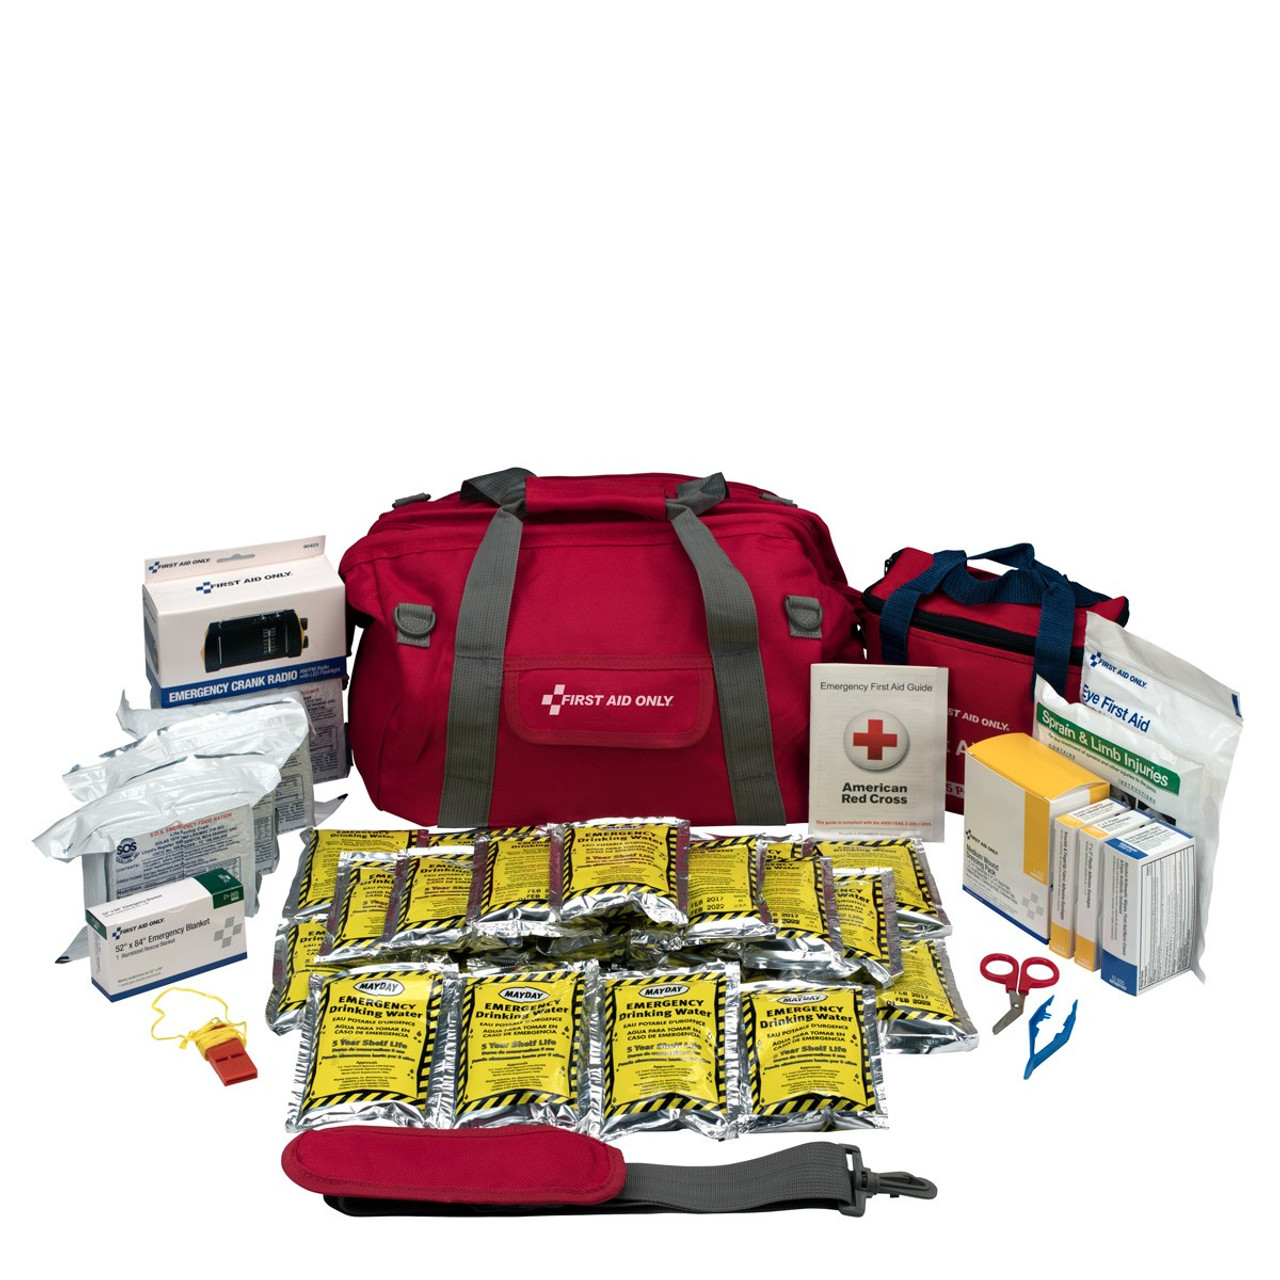 Emergency Preparedness, 24 Person, Large Fabric Bag First Aid Kit 90489